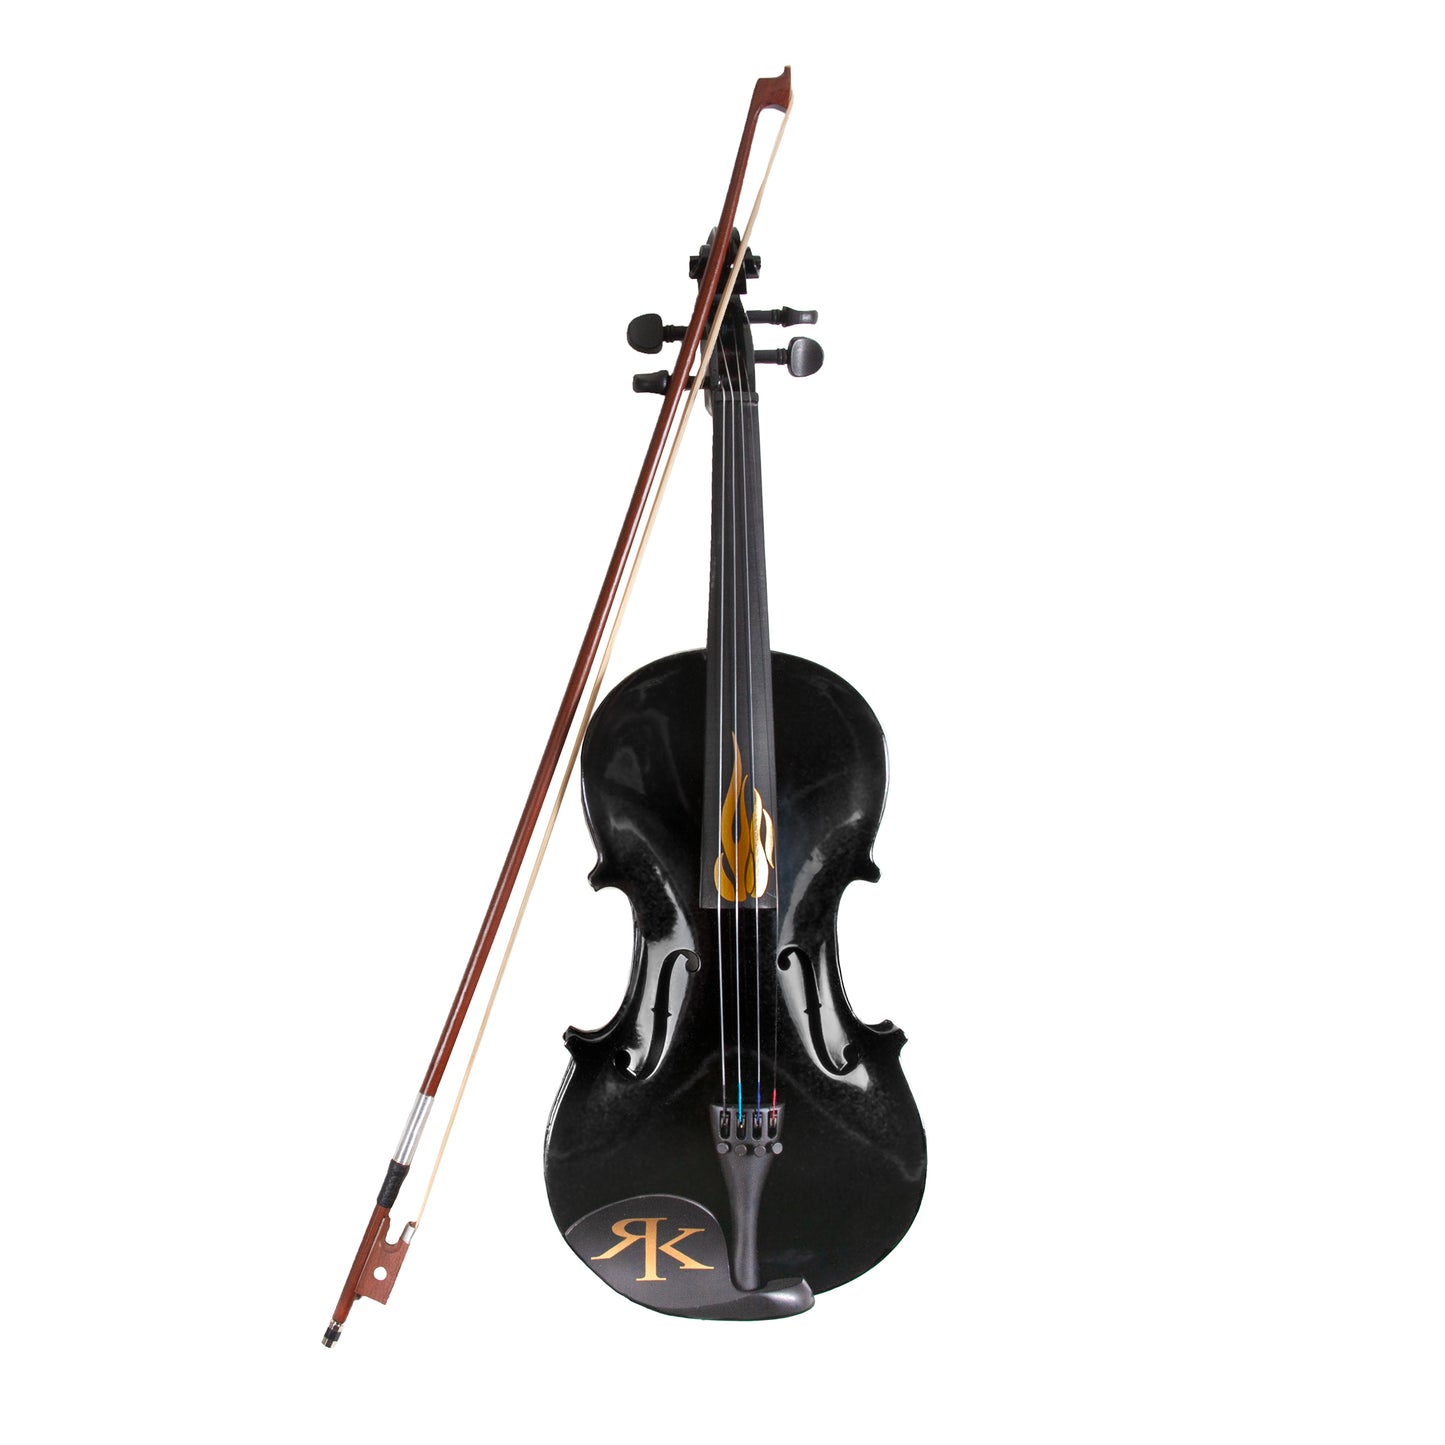 Flame  Fiddle Black w/ Case - Autographed by RK